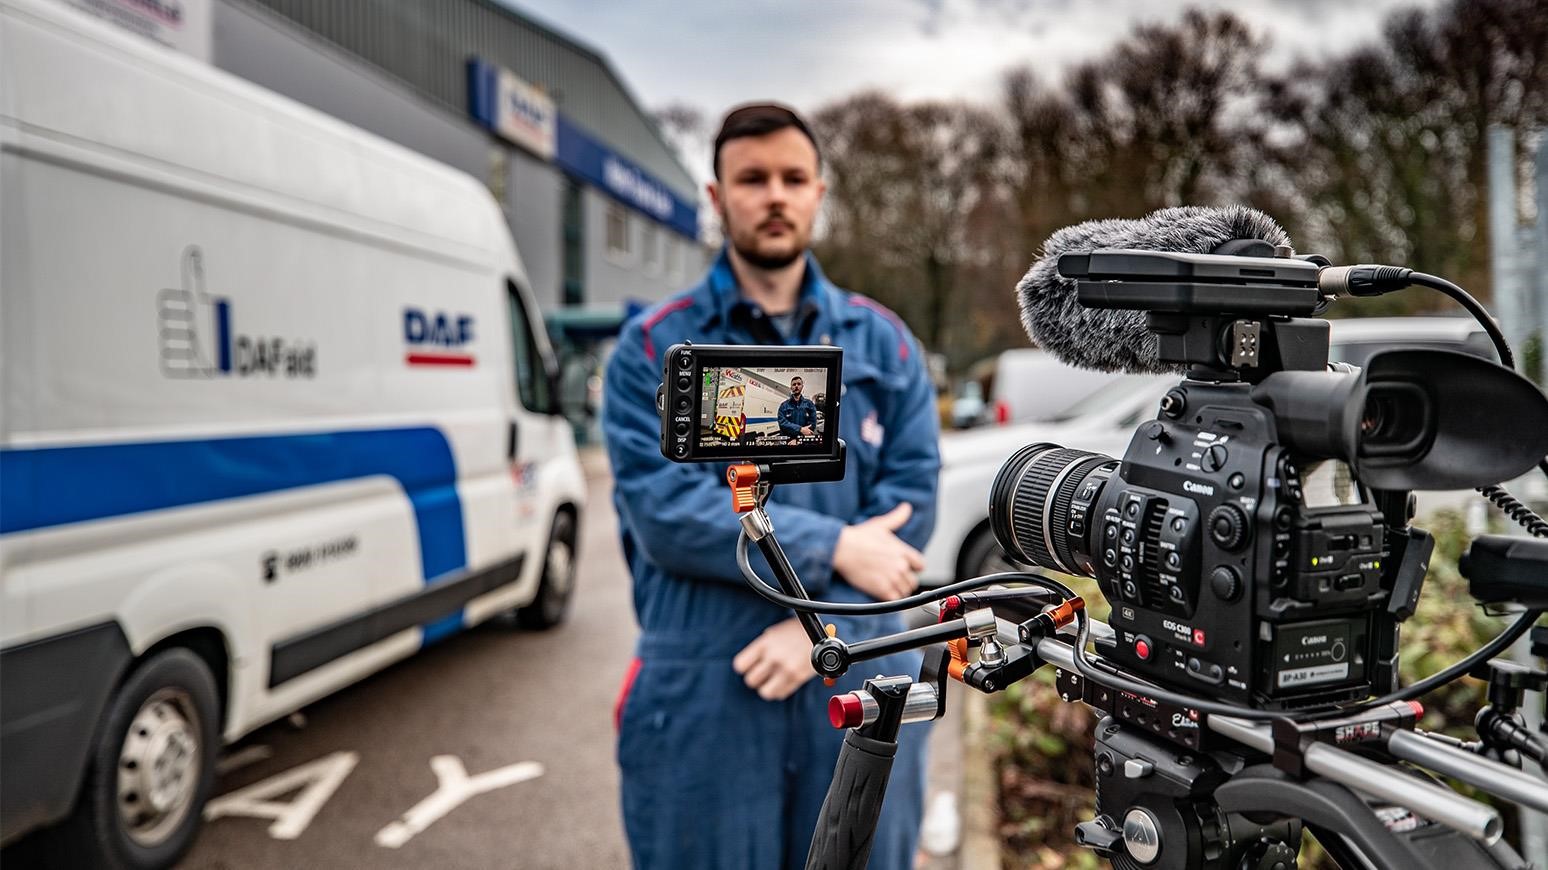 DAF Documentary Provides A Glimpse Of The Life Of DAFaid Technicians At Work